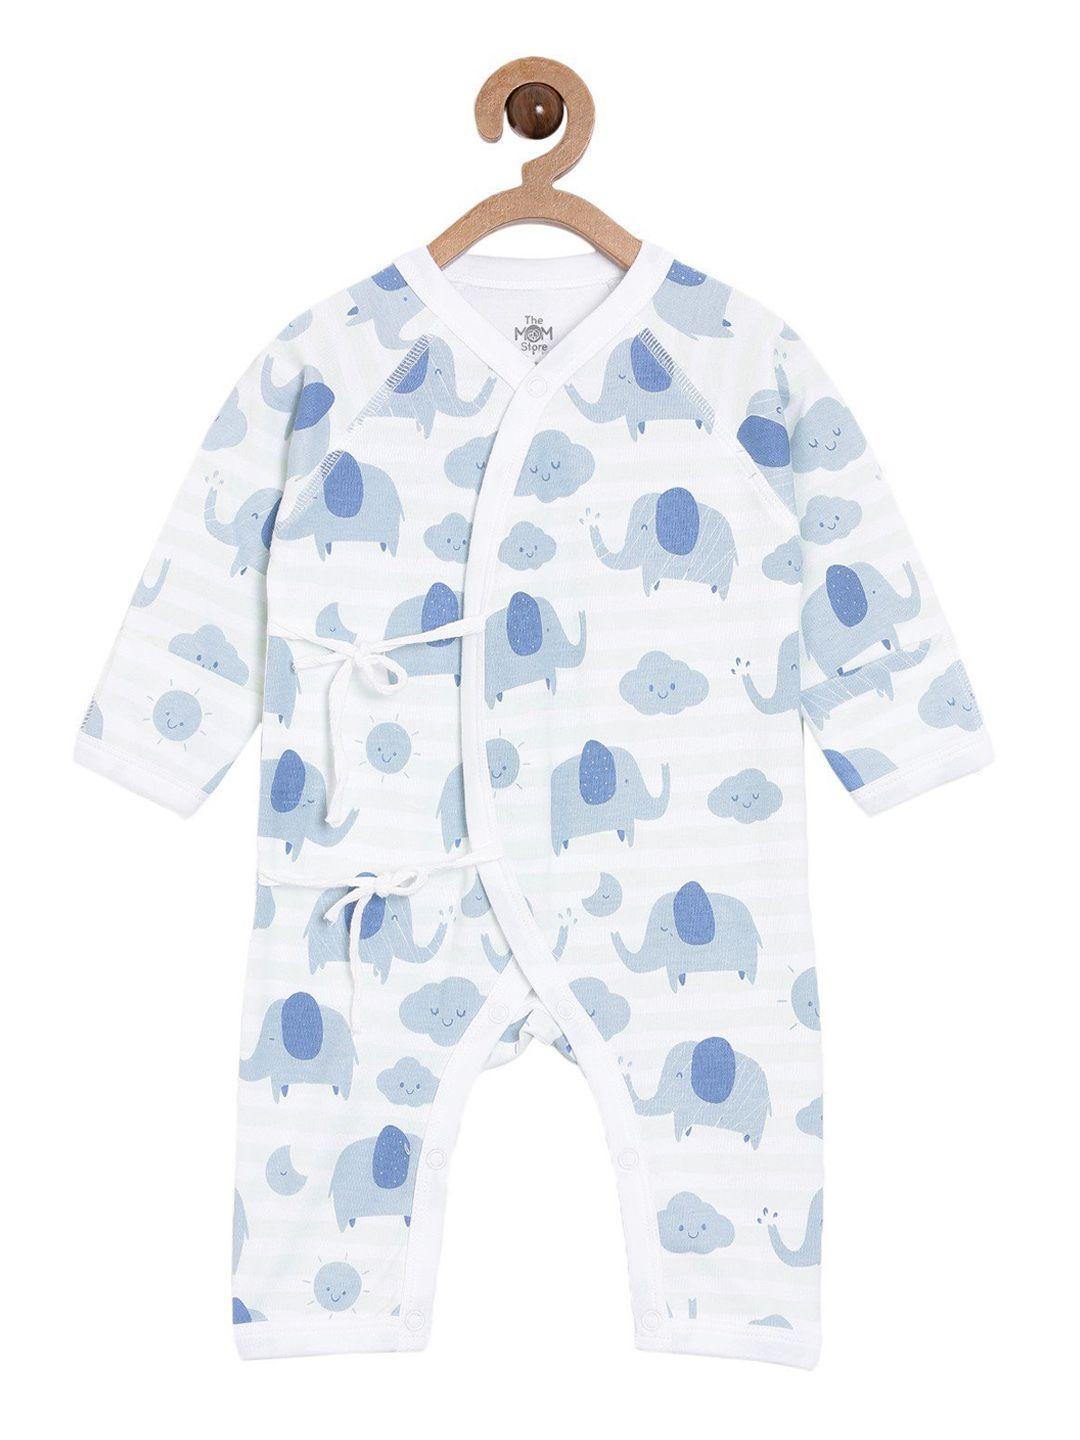 the mom store infants white & blue printed cotton romper